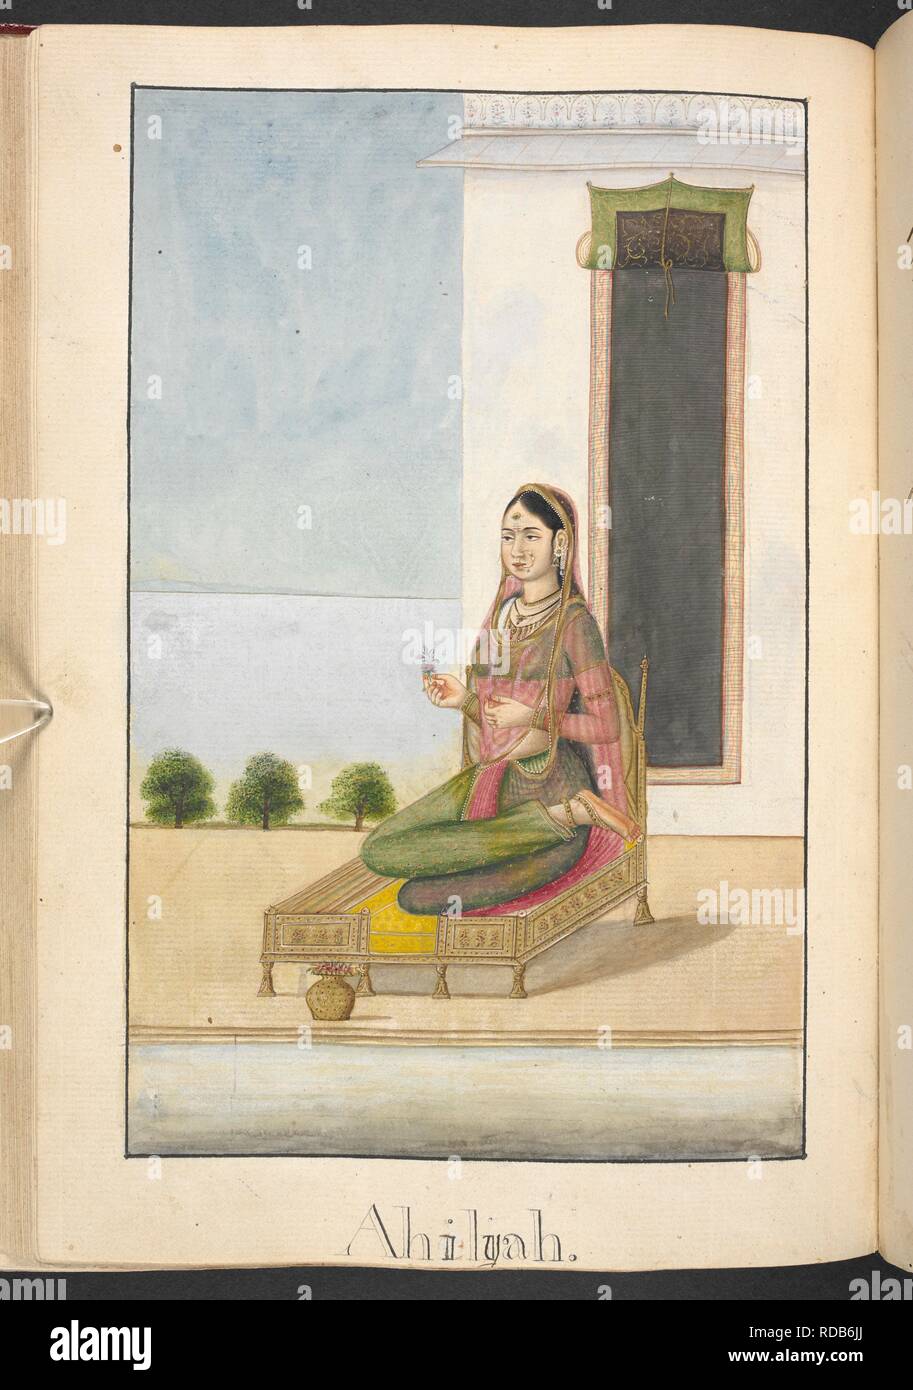 Ahalya, wife of the sage Gautama, who was turned to a stone. Inscribed: â€˜Ahilyah.â€™. 61 paintings illustrating the Adhyatma Ramayana, vol. 1. [Boddam collection.]. 1803 - 1804. Source: MSS Eur C116/1 f.69v. Author: ANON. Stock Photo